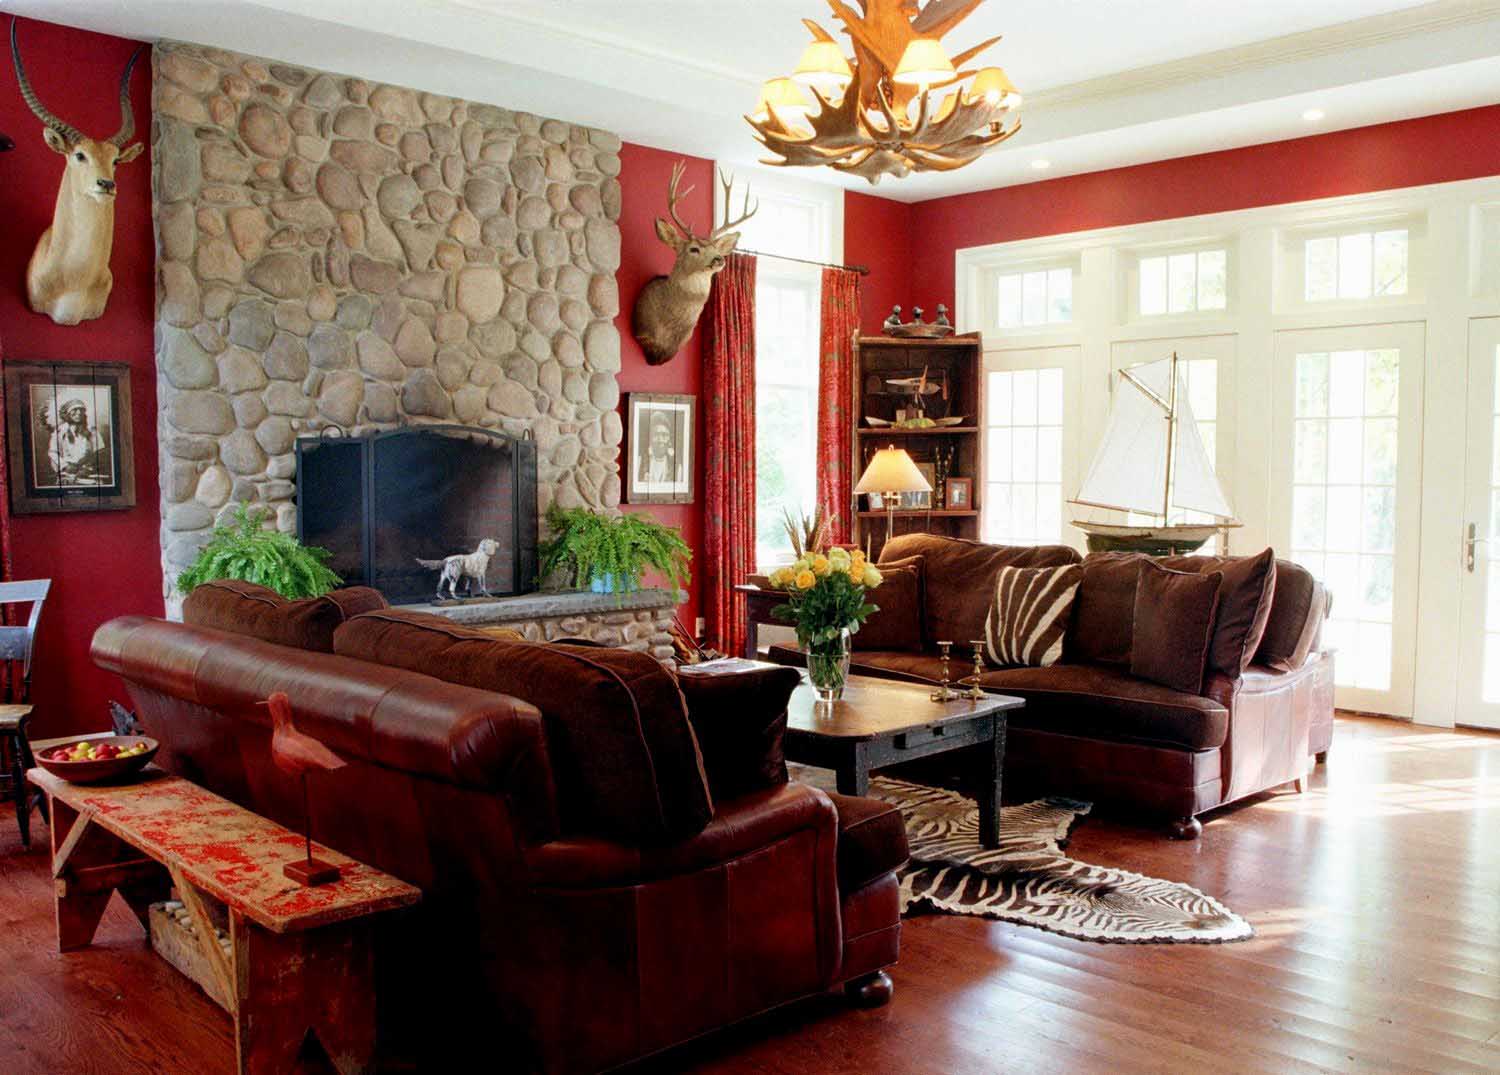 14+ Amazing Living Room Designs Indian Style, Interior and ...